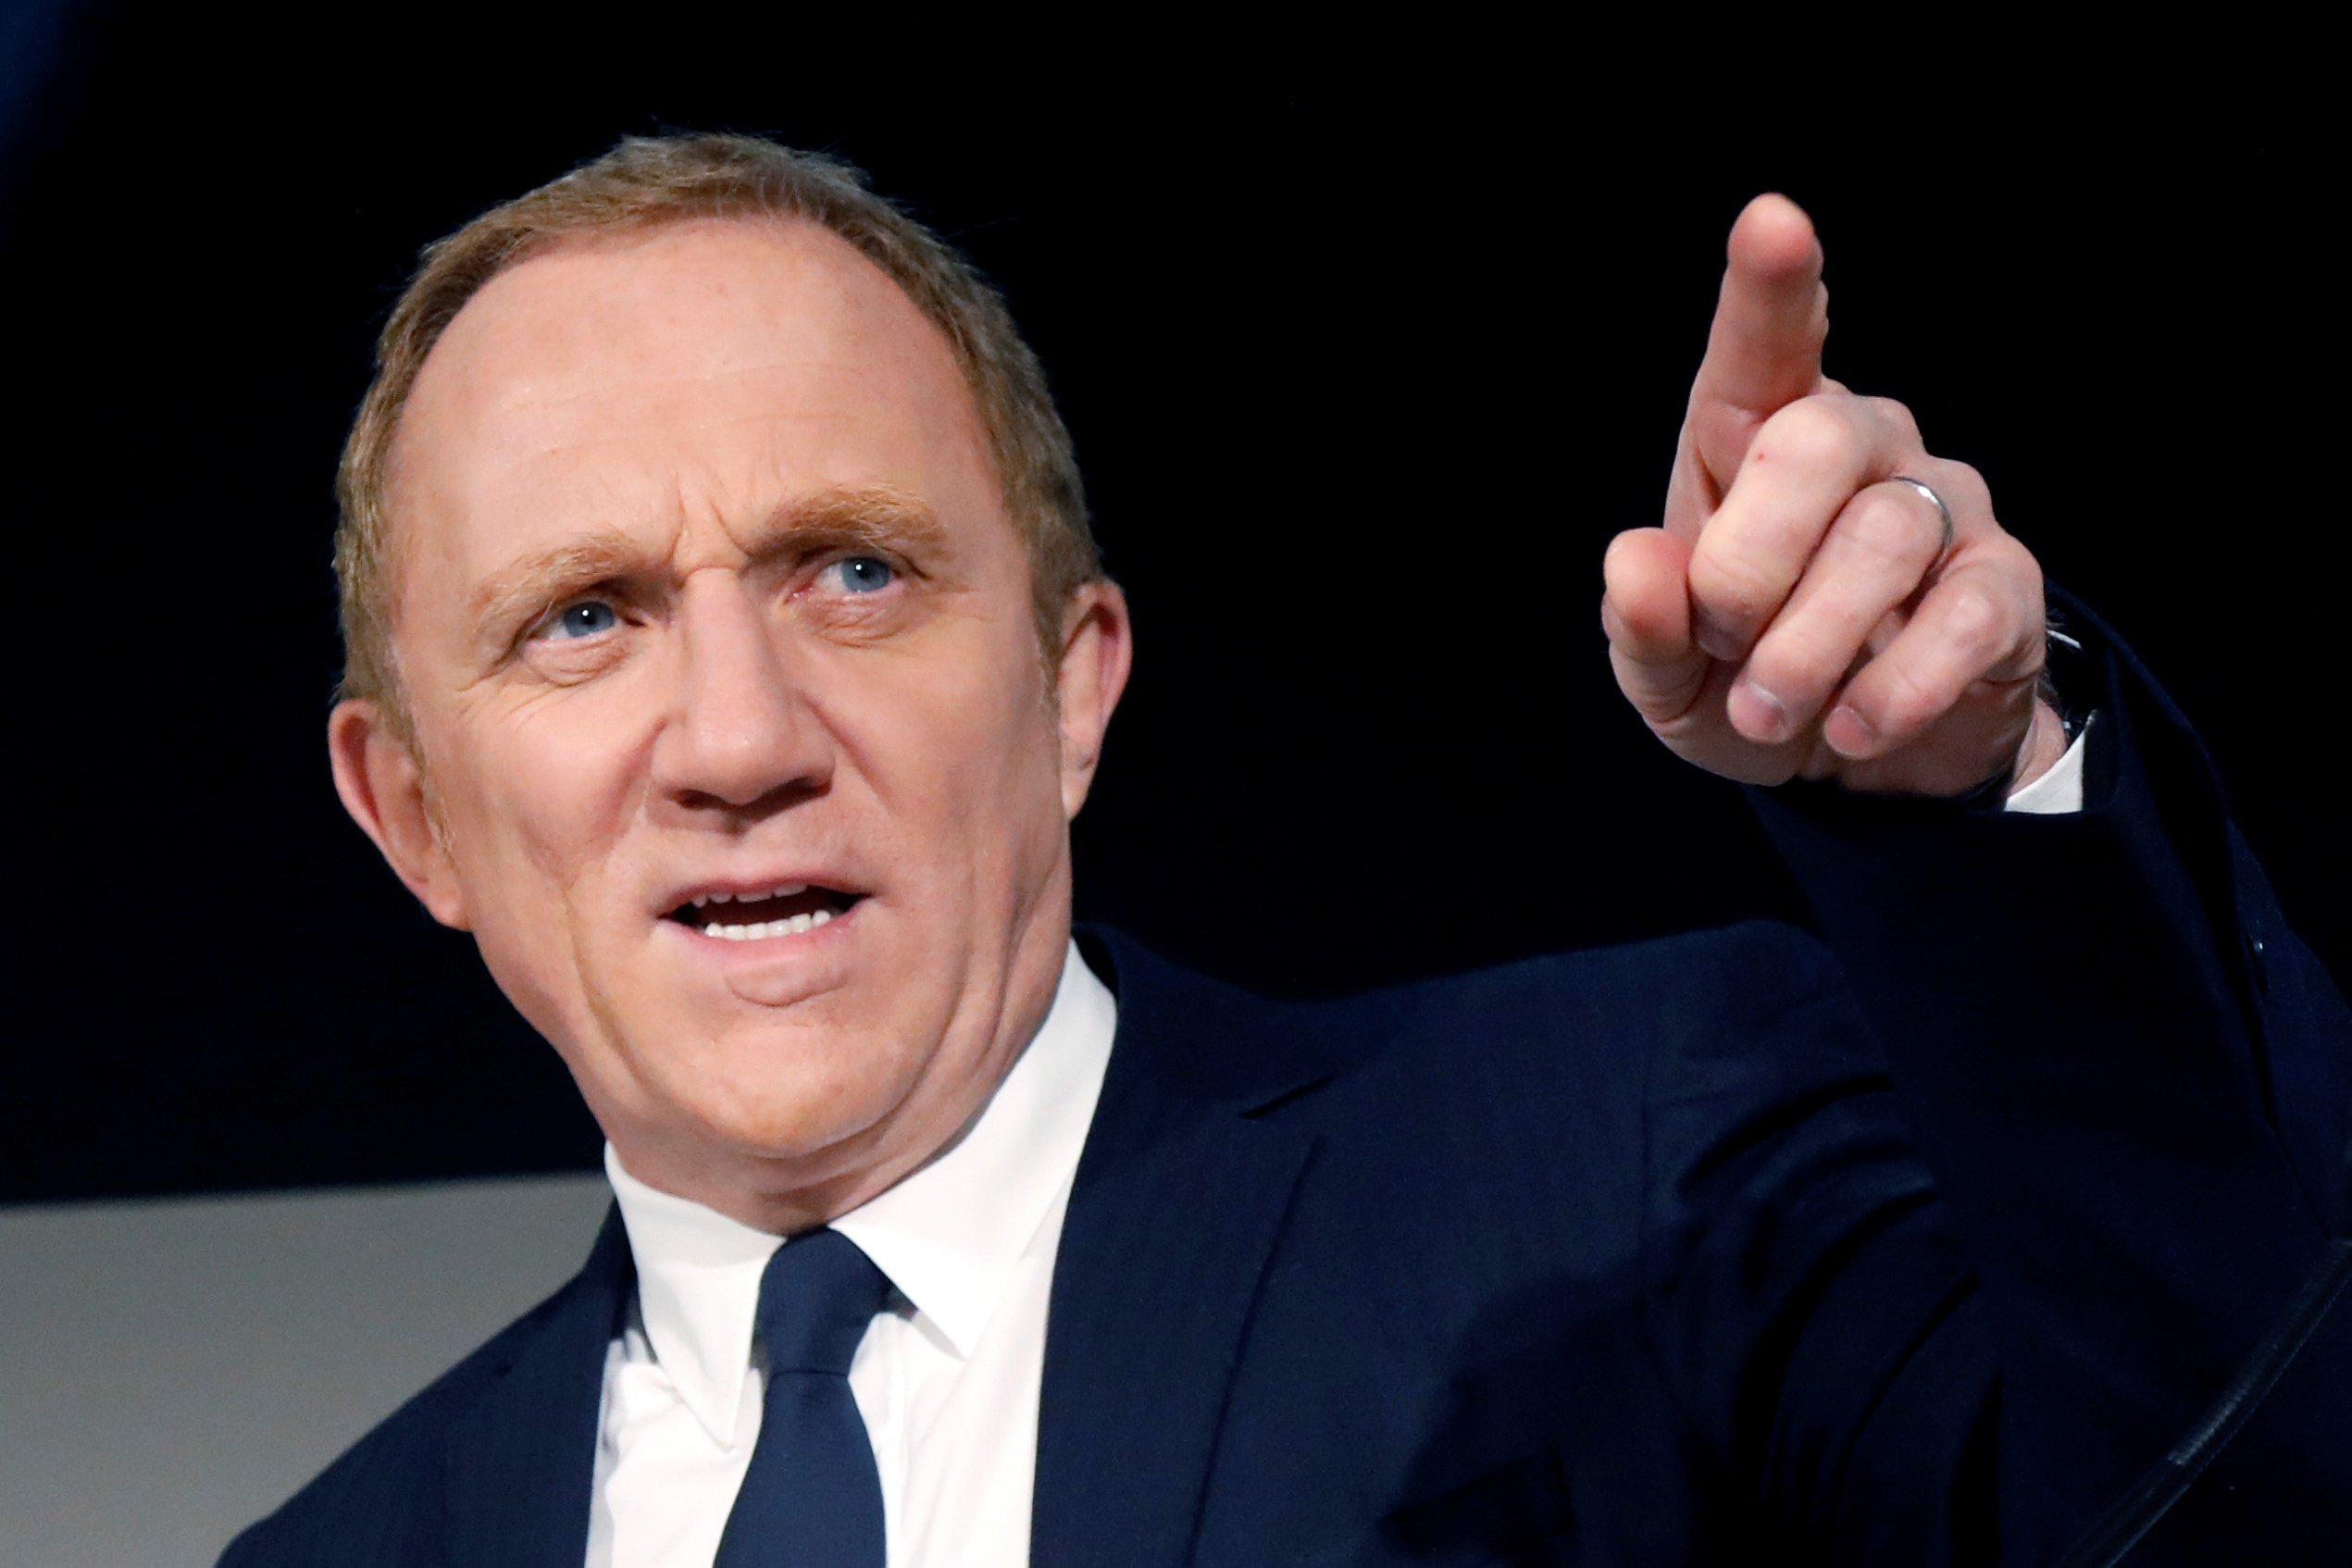 Francois-Henri Pinault, Chairman and CEO of Kering, attends a press conference  in Paris